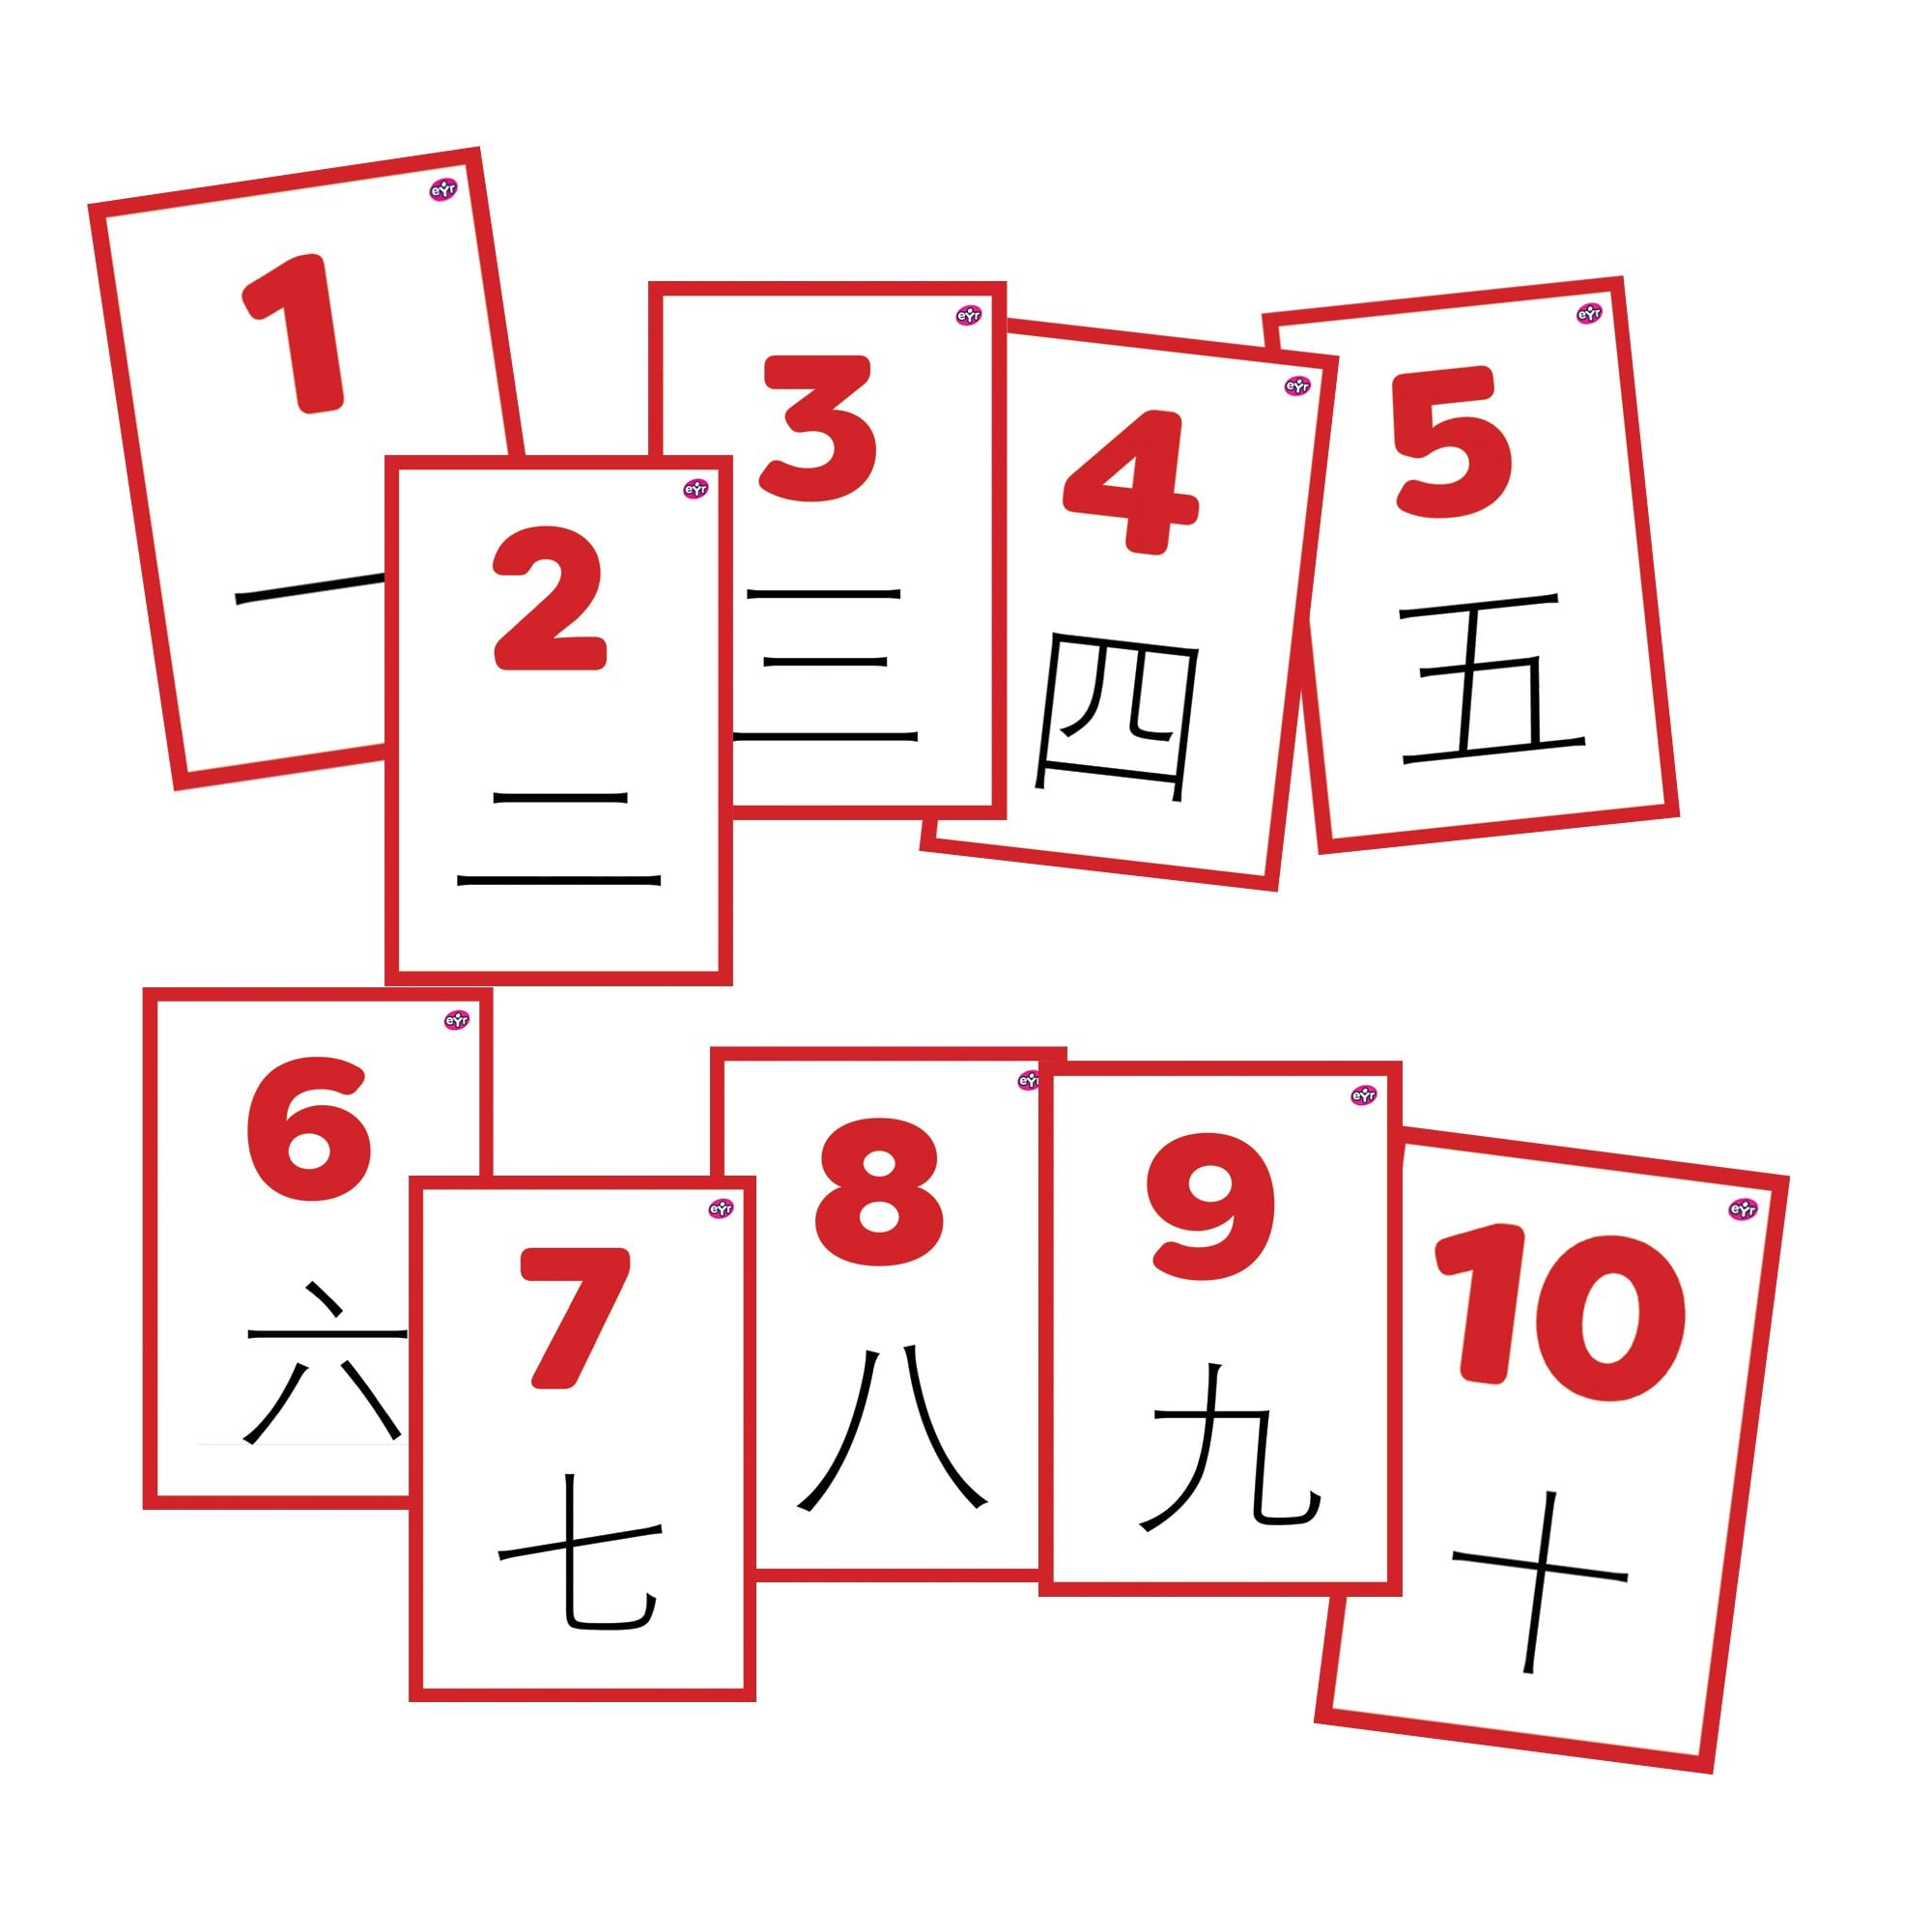 Chinese 1-10 Printable Number Flash Cards | Early Years Resources - Free Printable Mandarin Flashcards